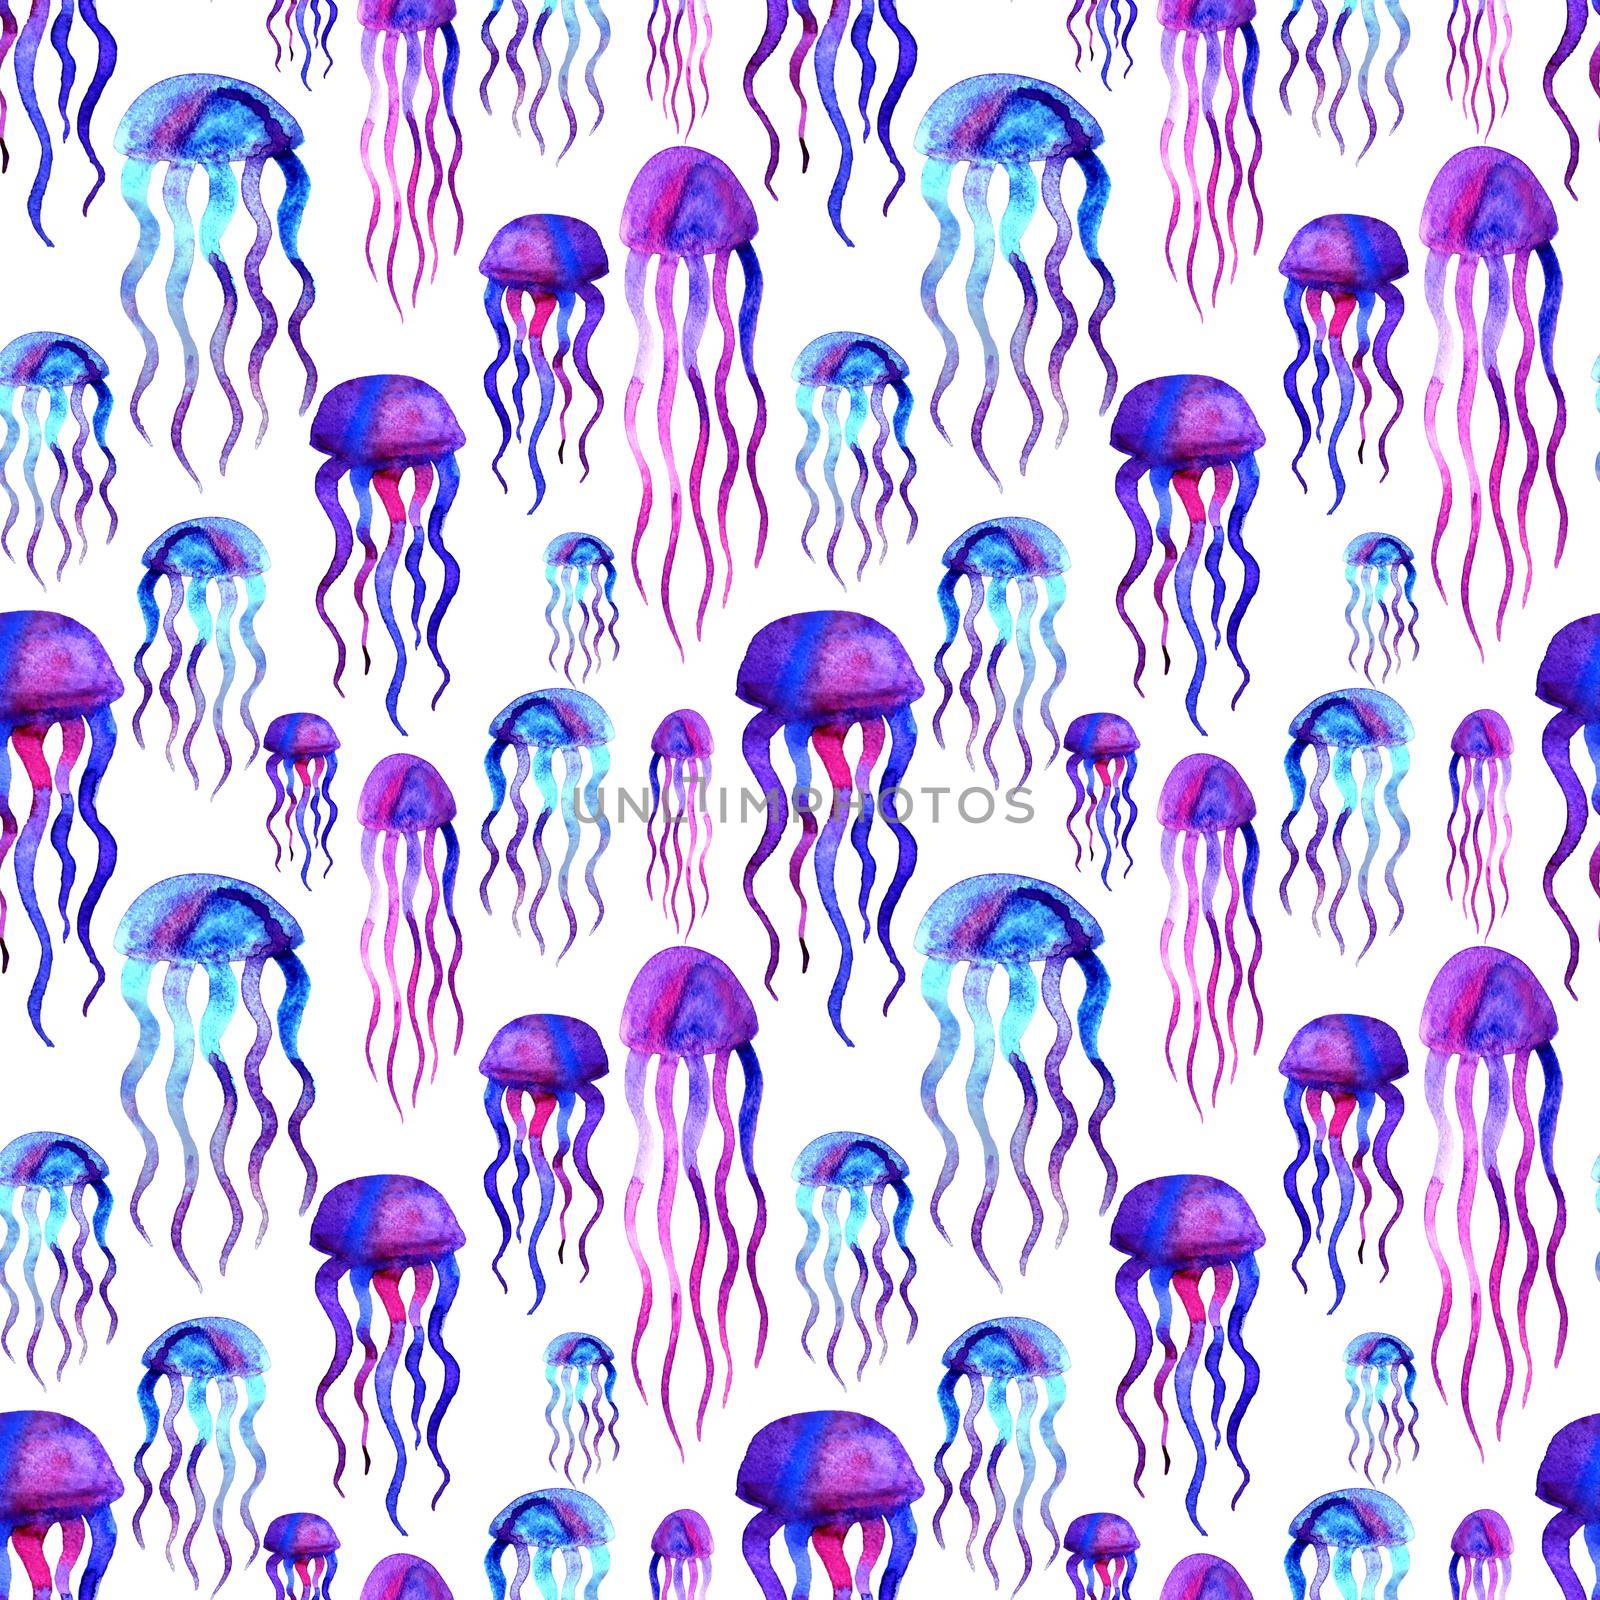 Hand drawn jellyfish. Watercolor pattern. Colorful endless Violet and blue